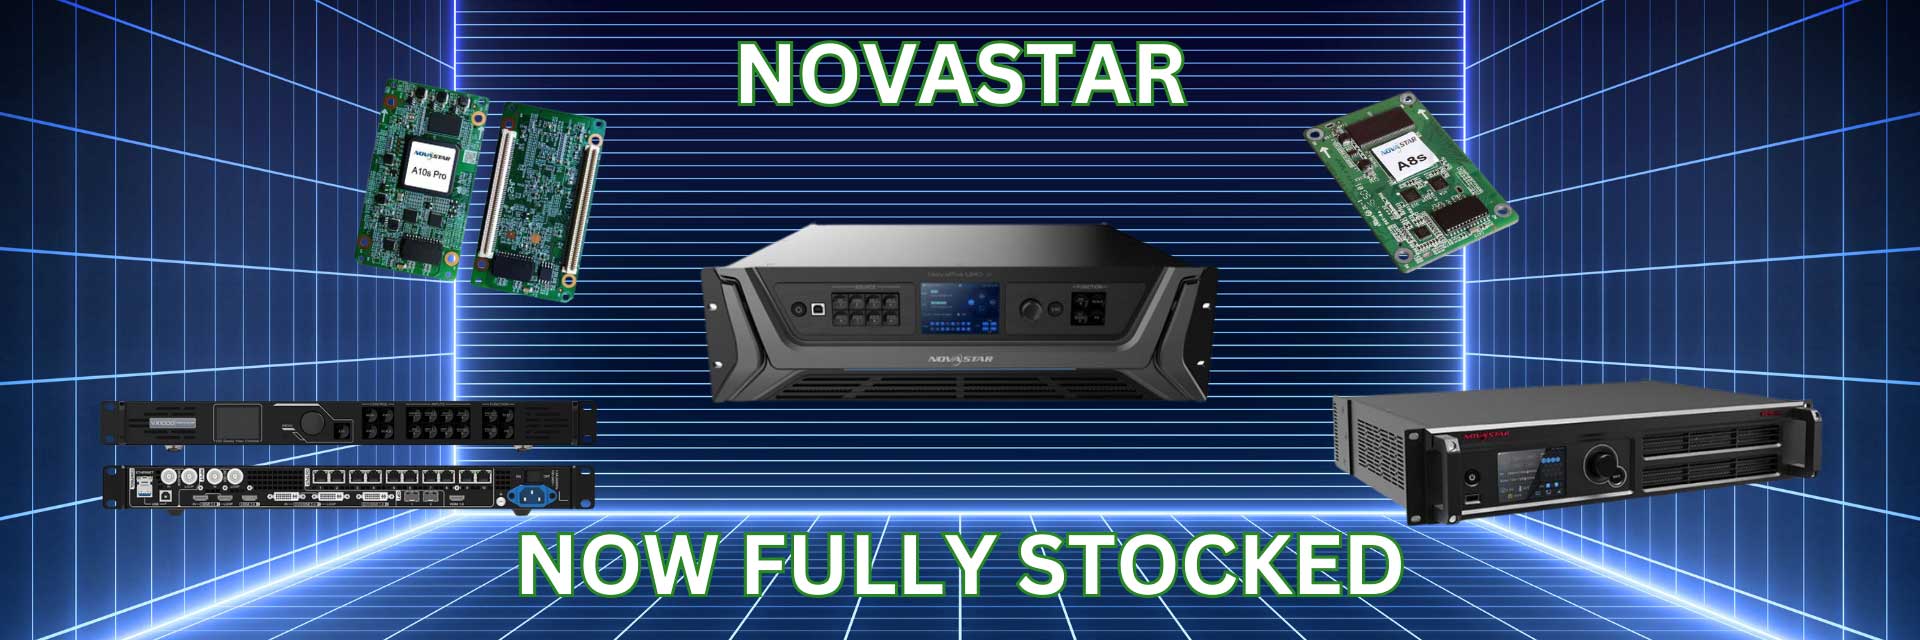 Novastar banner, "Now fully stocked", A10s Pro LED Receiving Card, MCTRL4K LED Display Controller, A8s Mini LED Receiving Card, NovaPro UHD Jr All-in-One LED display controller